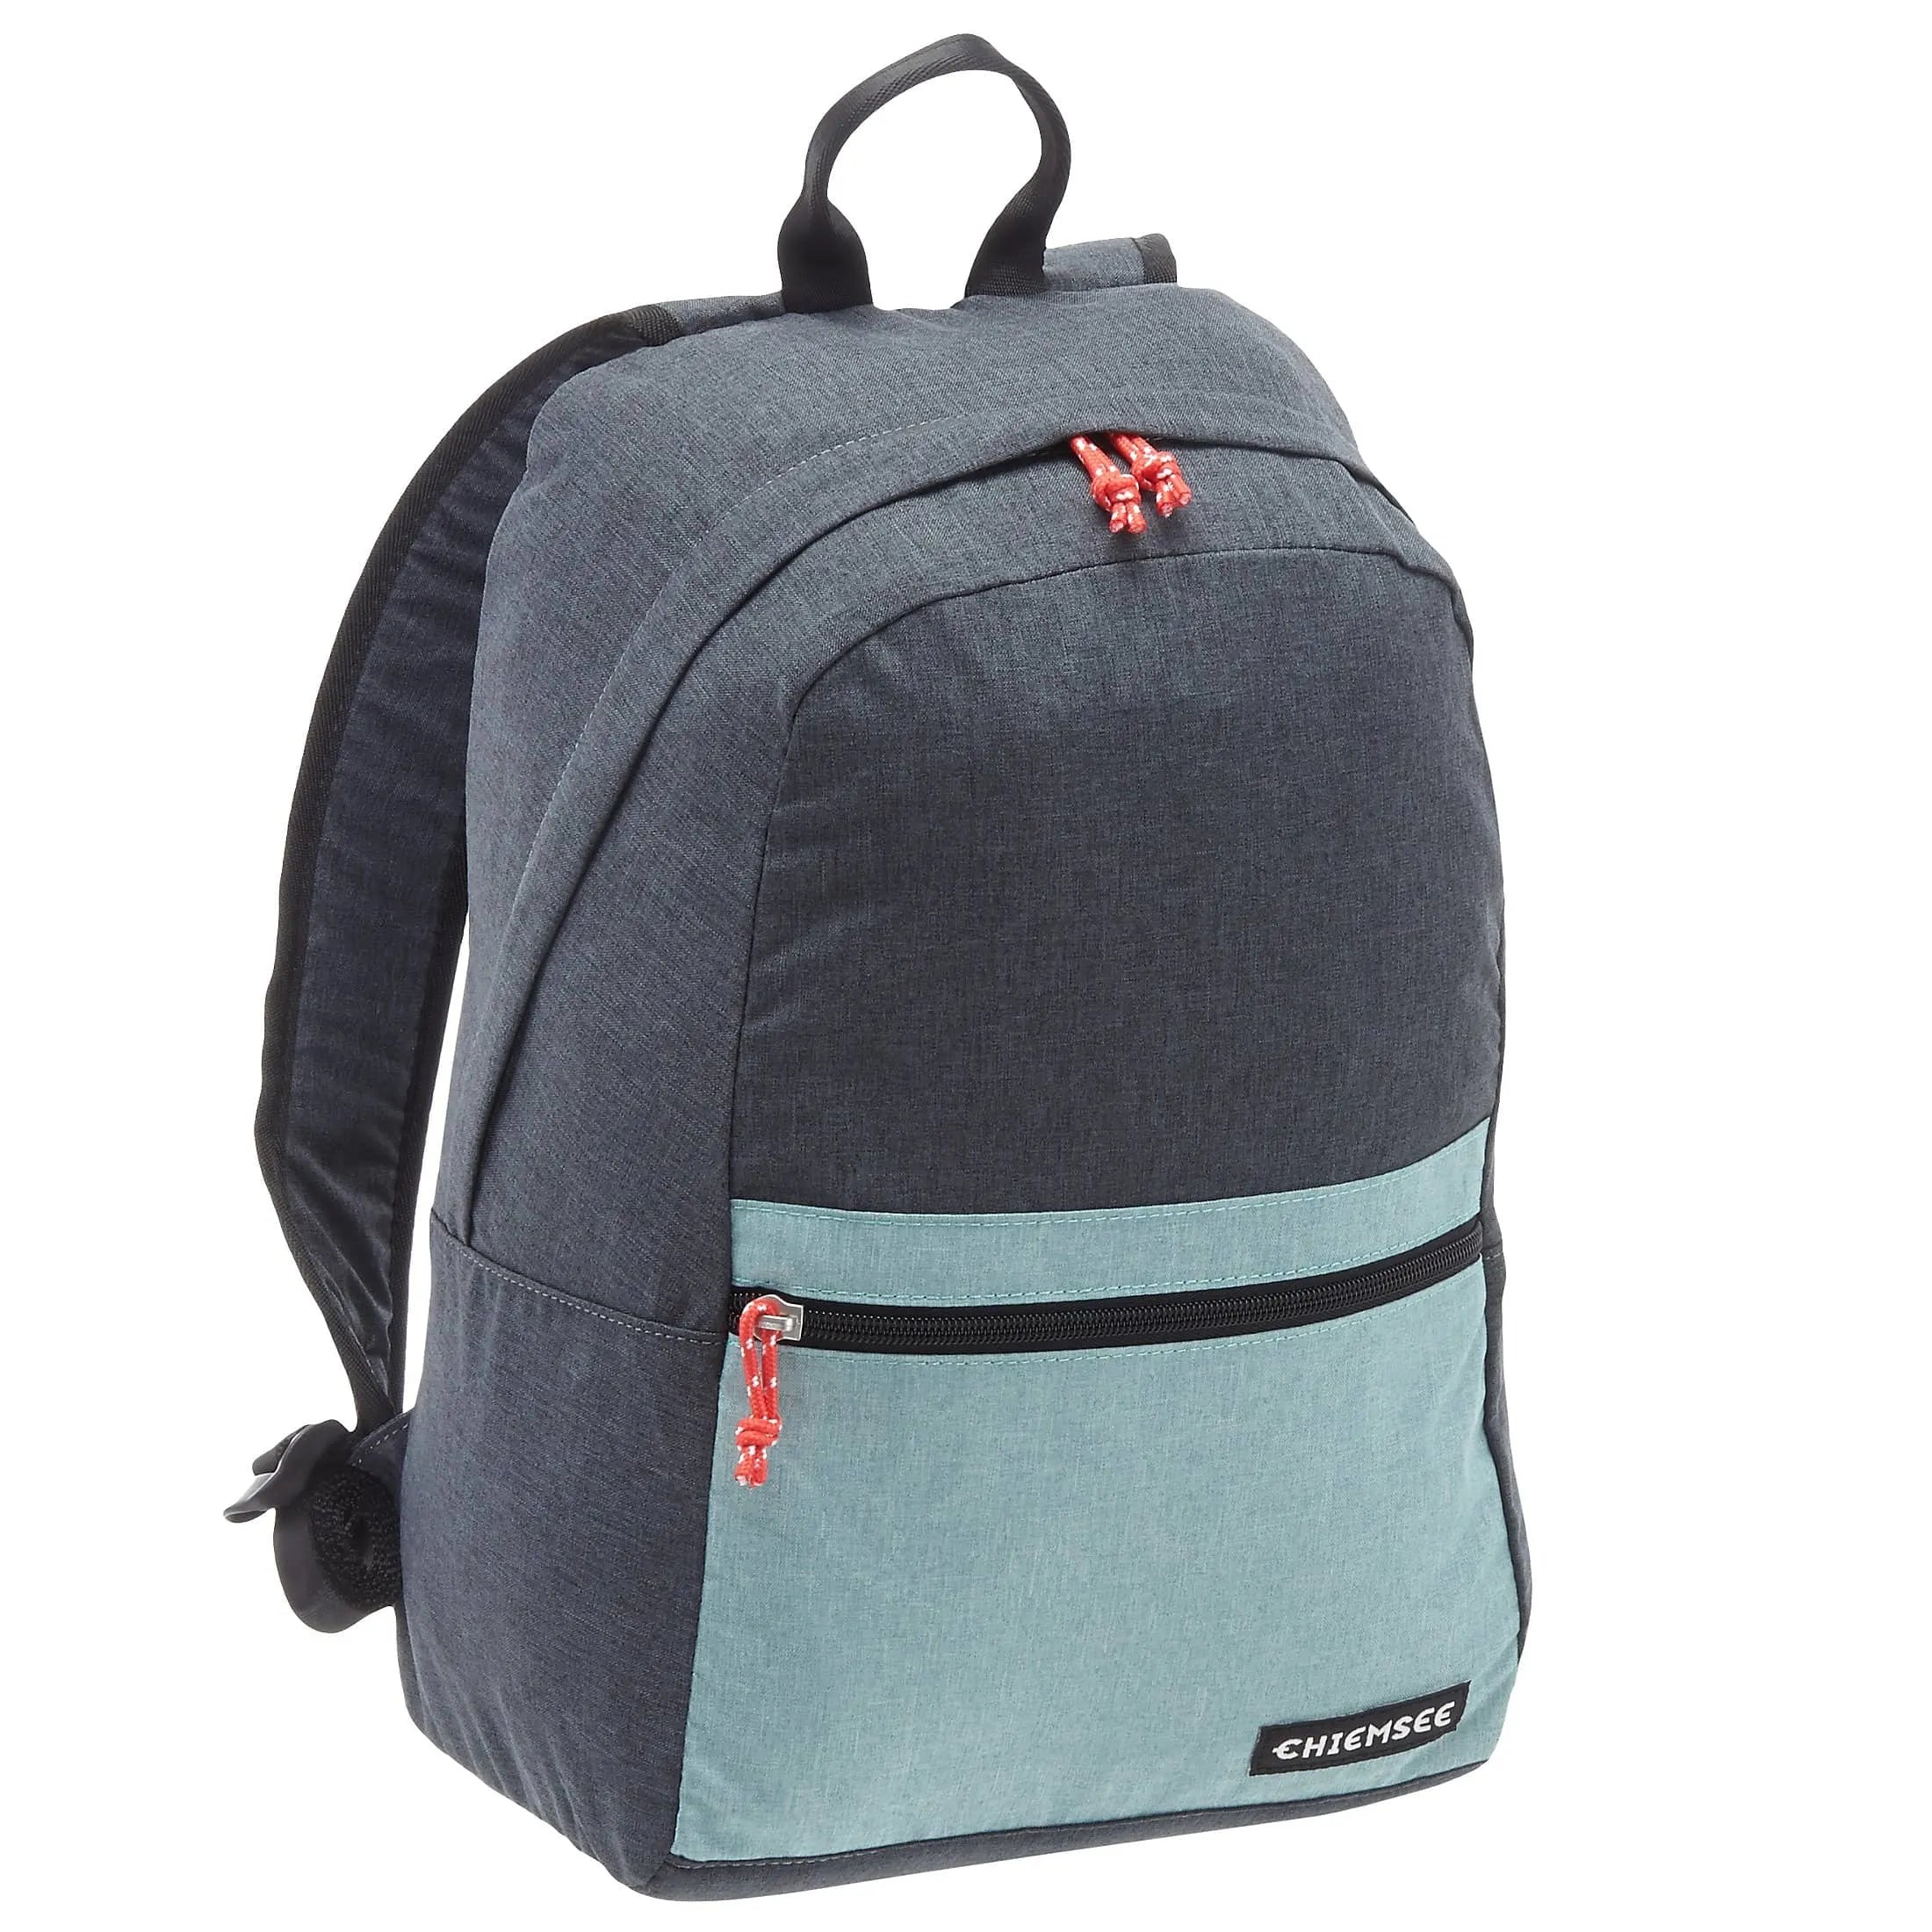 Chiemsee Sports & Travel Bags Easy Backpack 42 cm - coronet blue